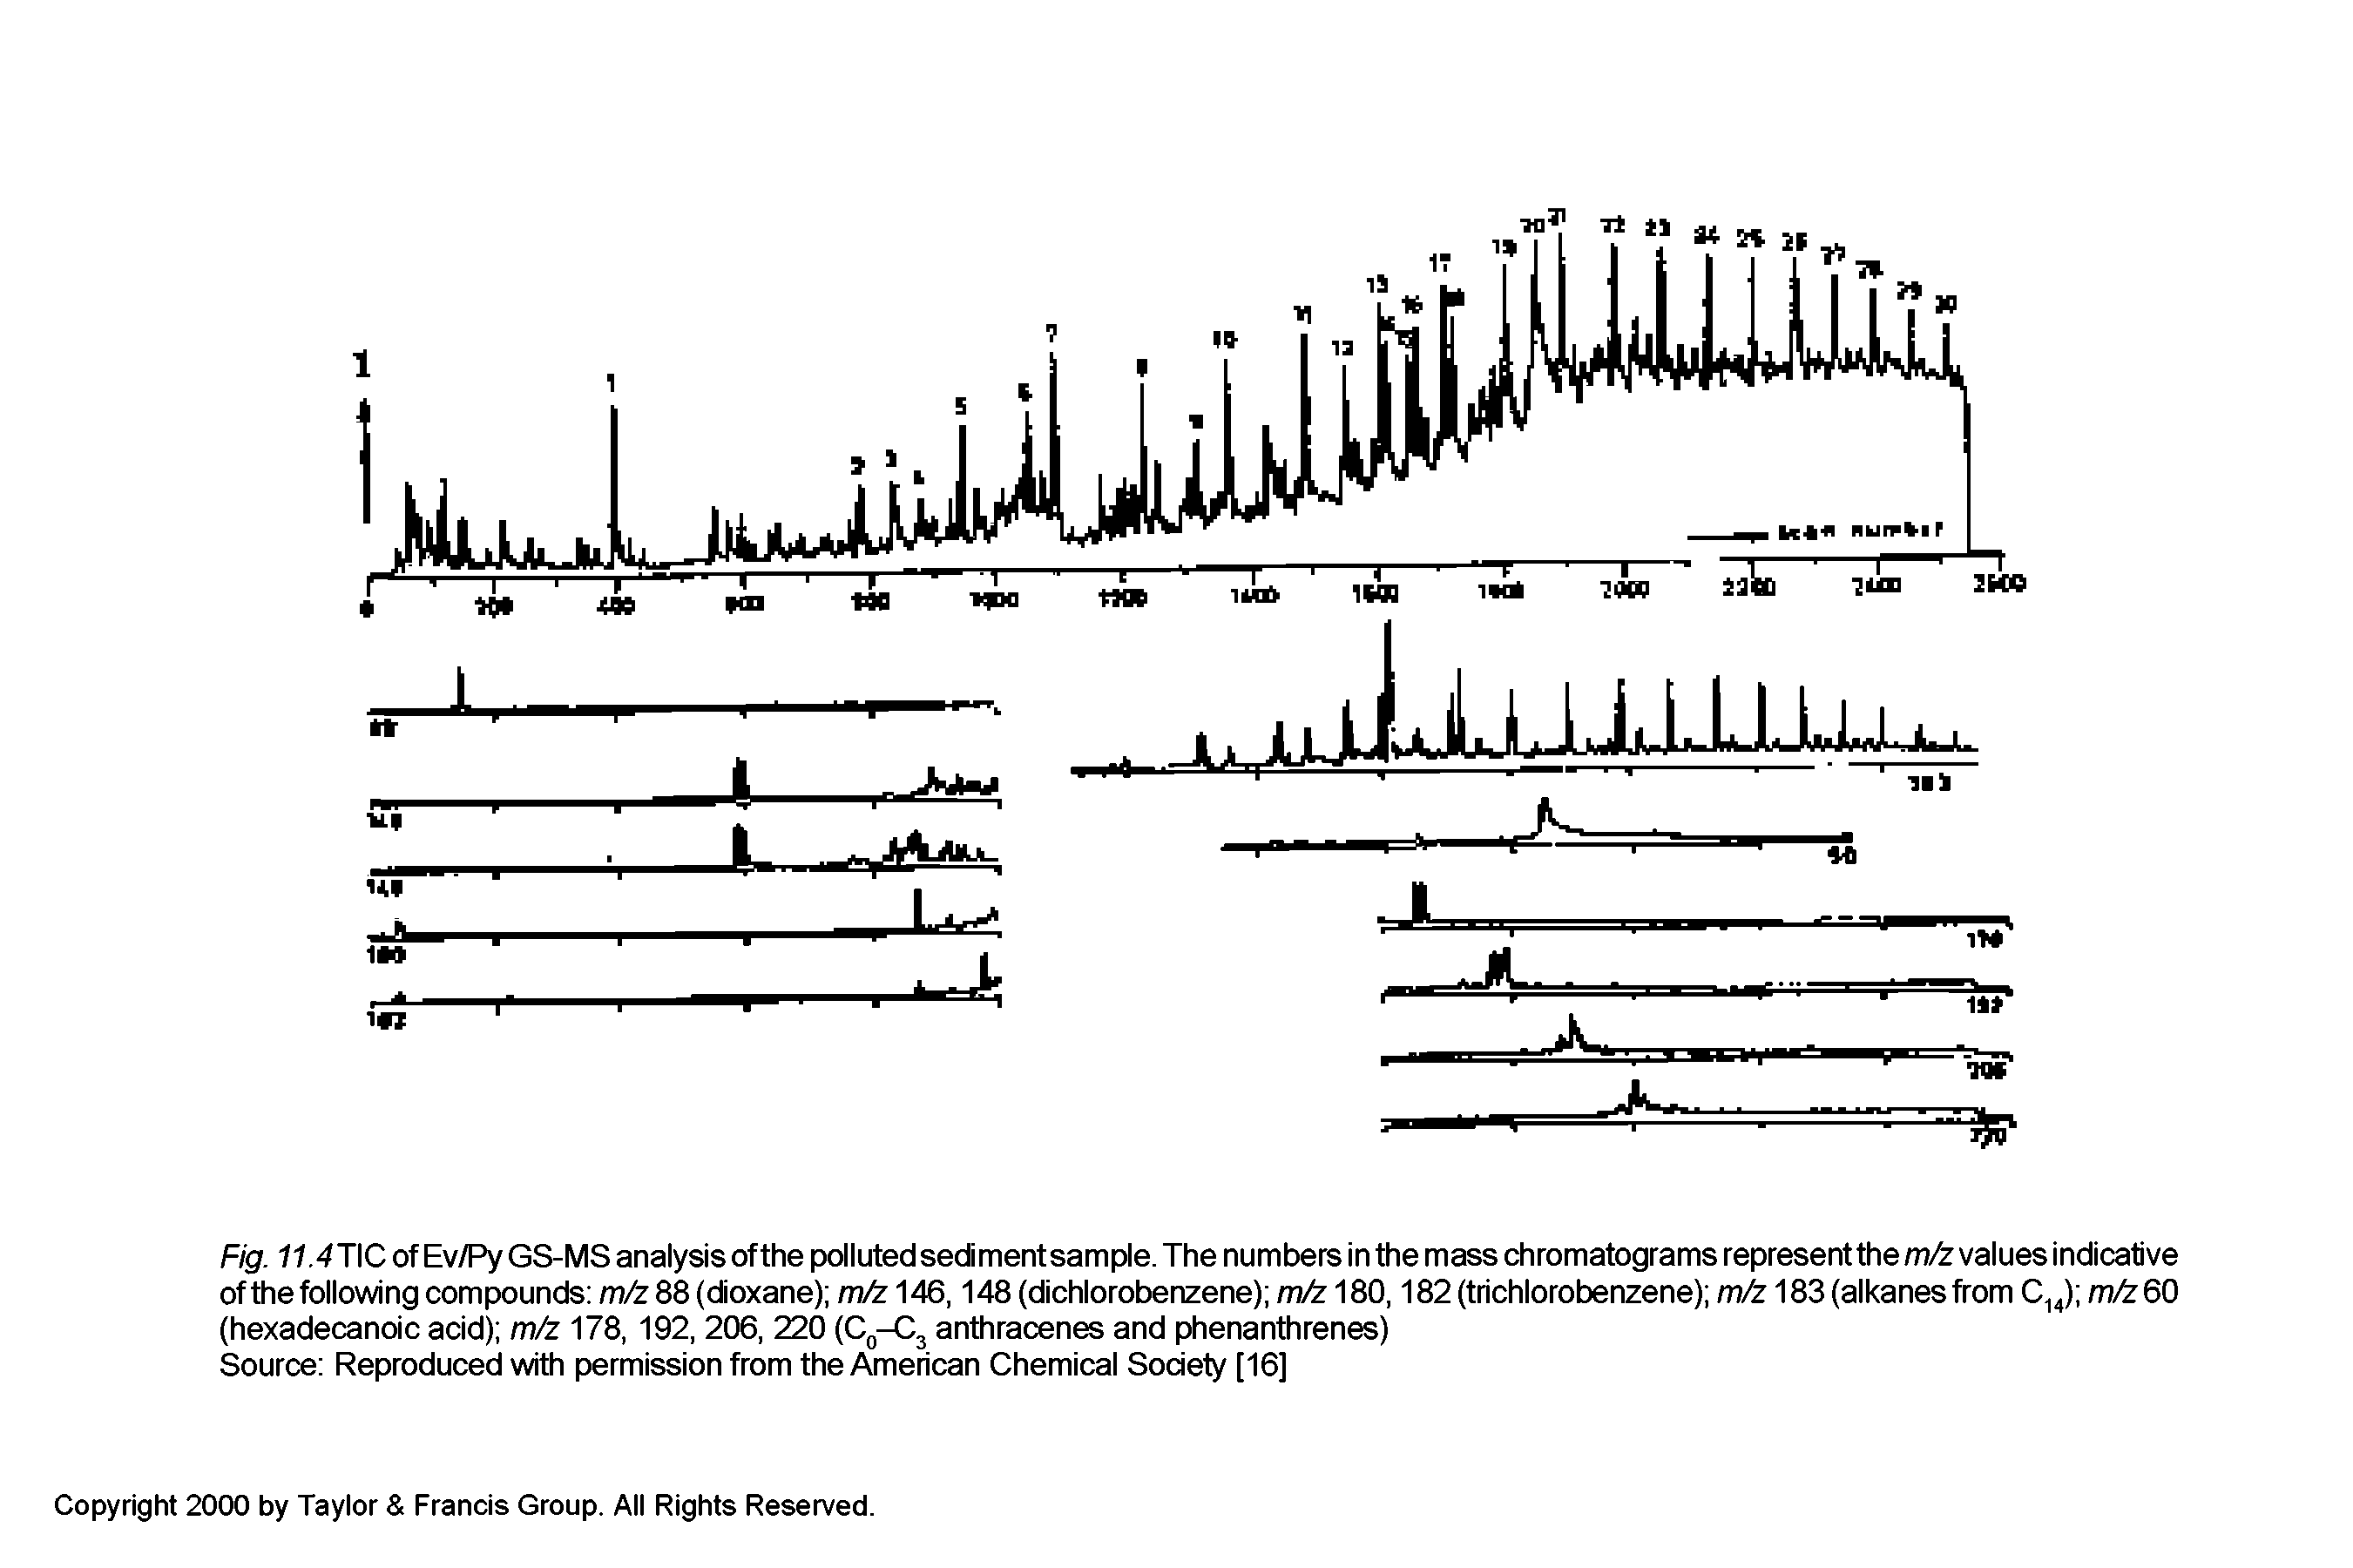 Fig. 11.4J C of Ev/Py GS-MS analysis ofthe polluted sediment sample. The numbers in the mass chromatograms represent the m/z values indicative of the following compounds m/z 88 (dioxane) m/z 146,148 (dichlorobenzene) m/z 180,182 (trichlorobenzene) m/z 183 (alkanes from C14) m/z 60 (hexadecanoic acid) m/z 178, 192, 206, 220 (C0-C3 anthracenes and phenanthrenes)...